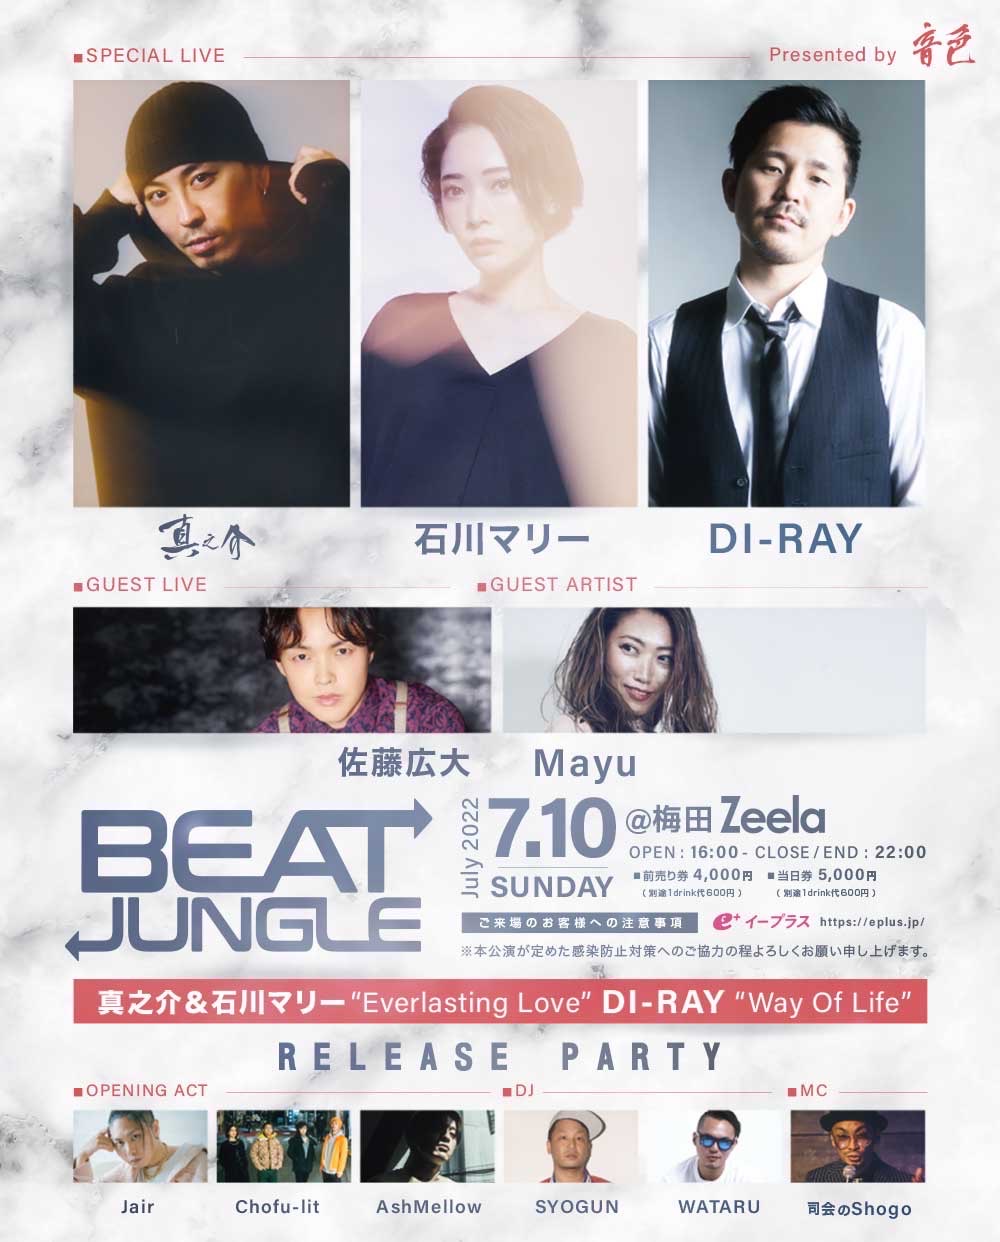 Presented by 音色　真之介＆石川マリー '' Everlasting Love '' & DI-RAY '' Way Of Life '' RELEASE PARTY　「BEAT JUNGLE」